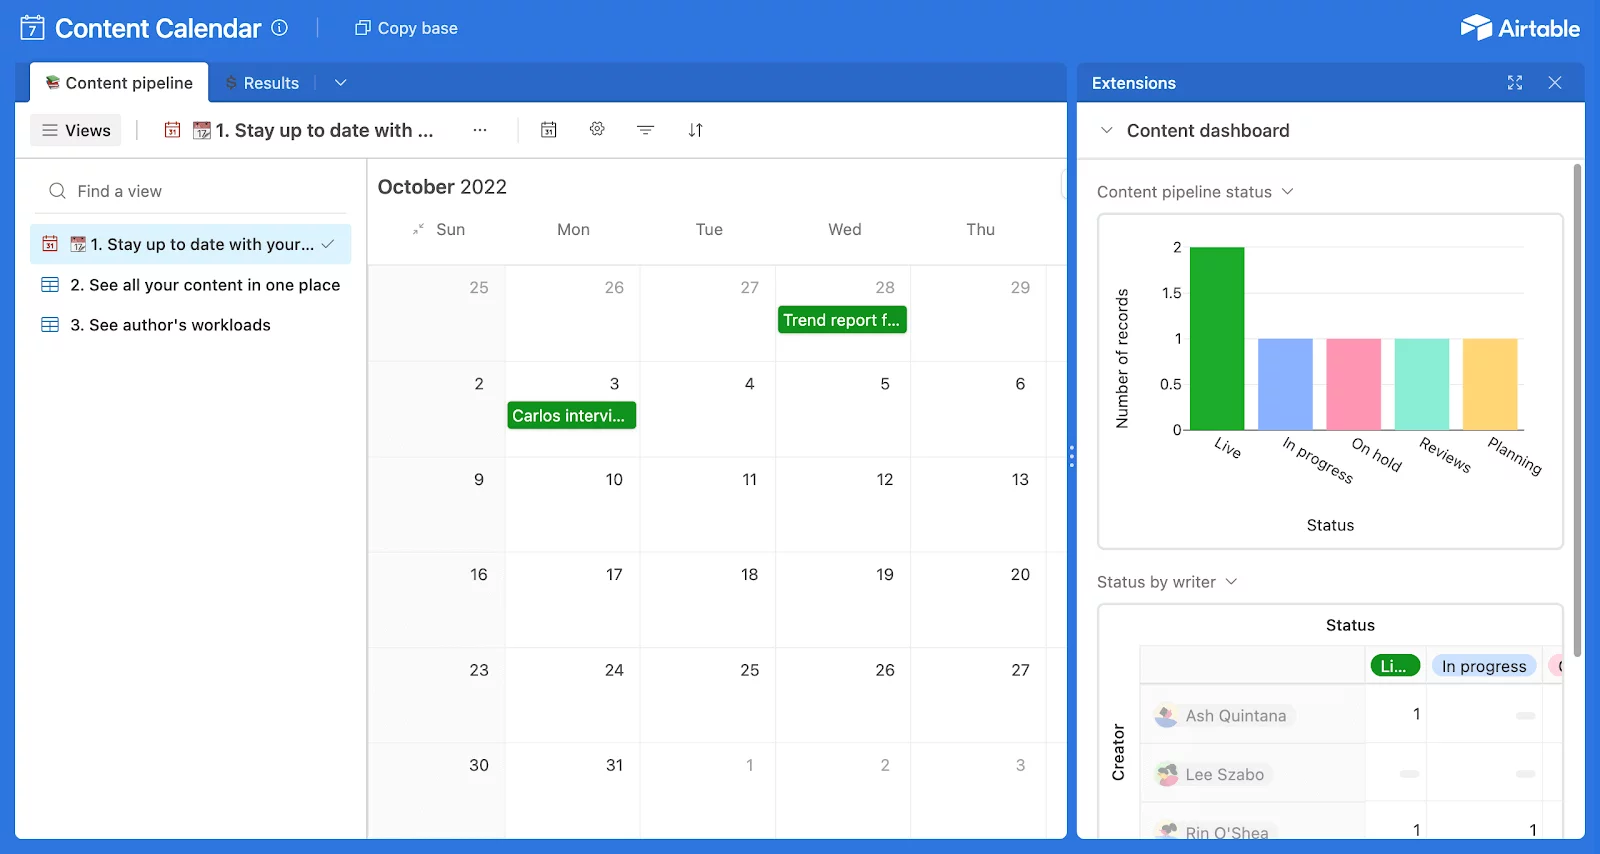 Custom content calendar in Airtable for October 2022